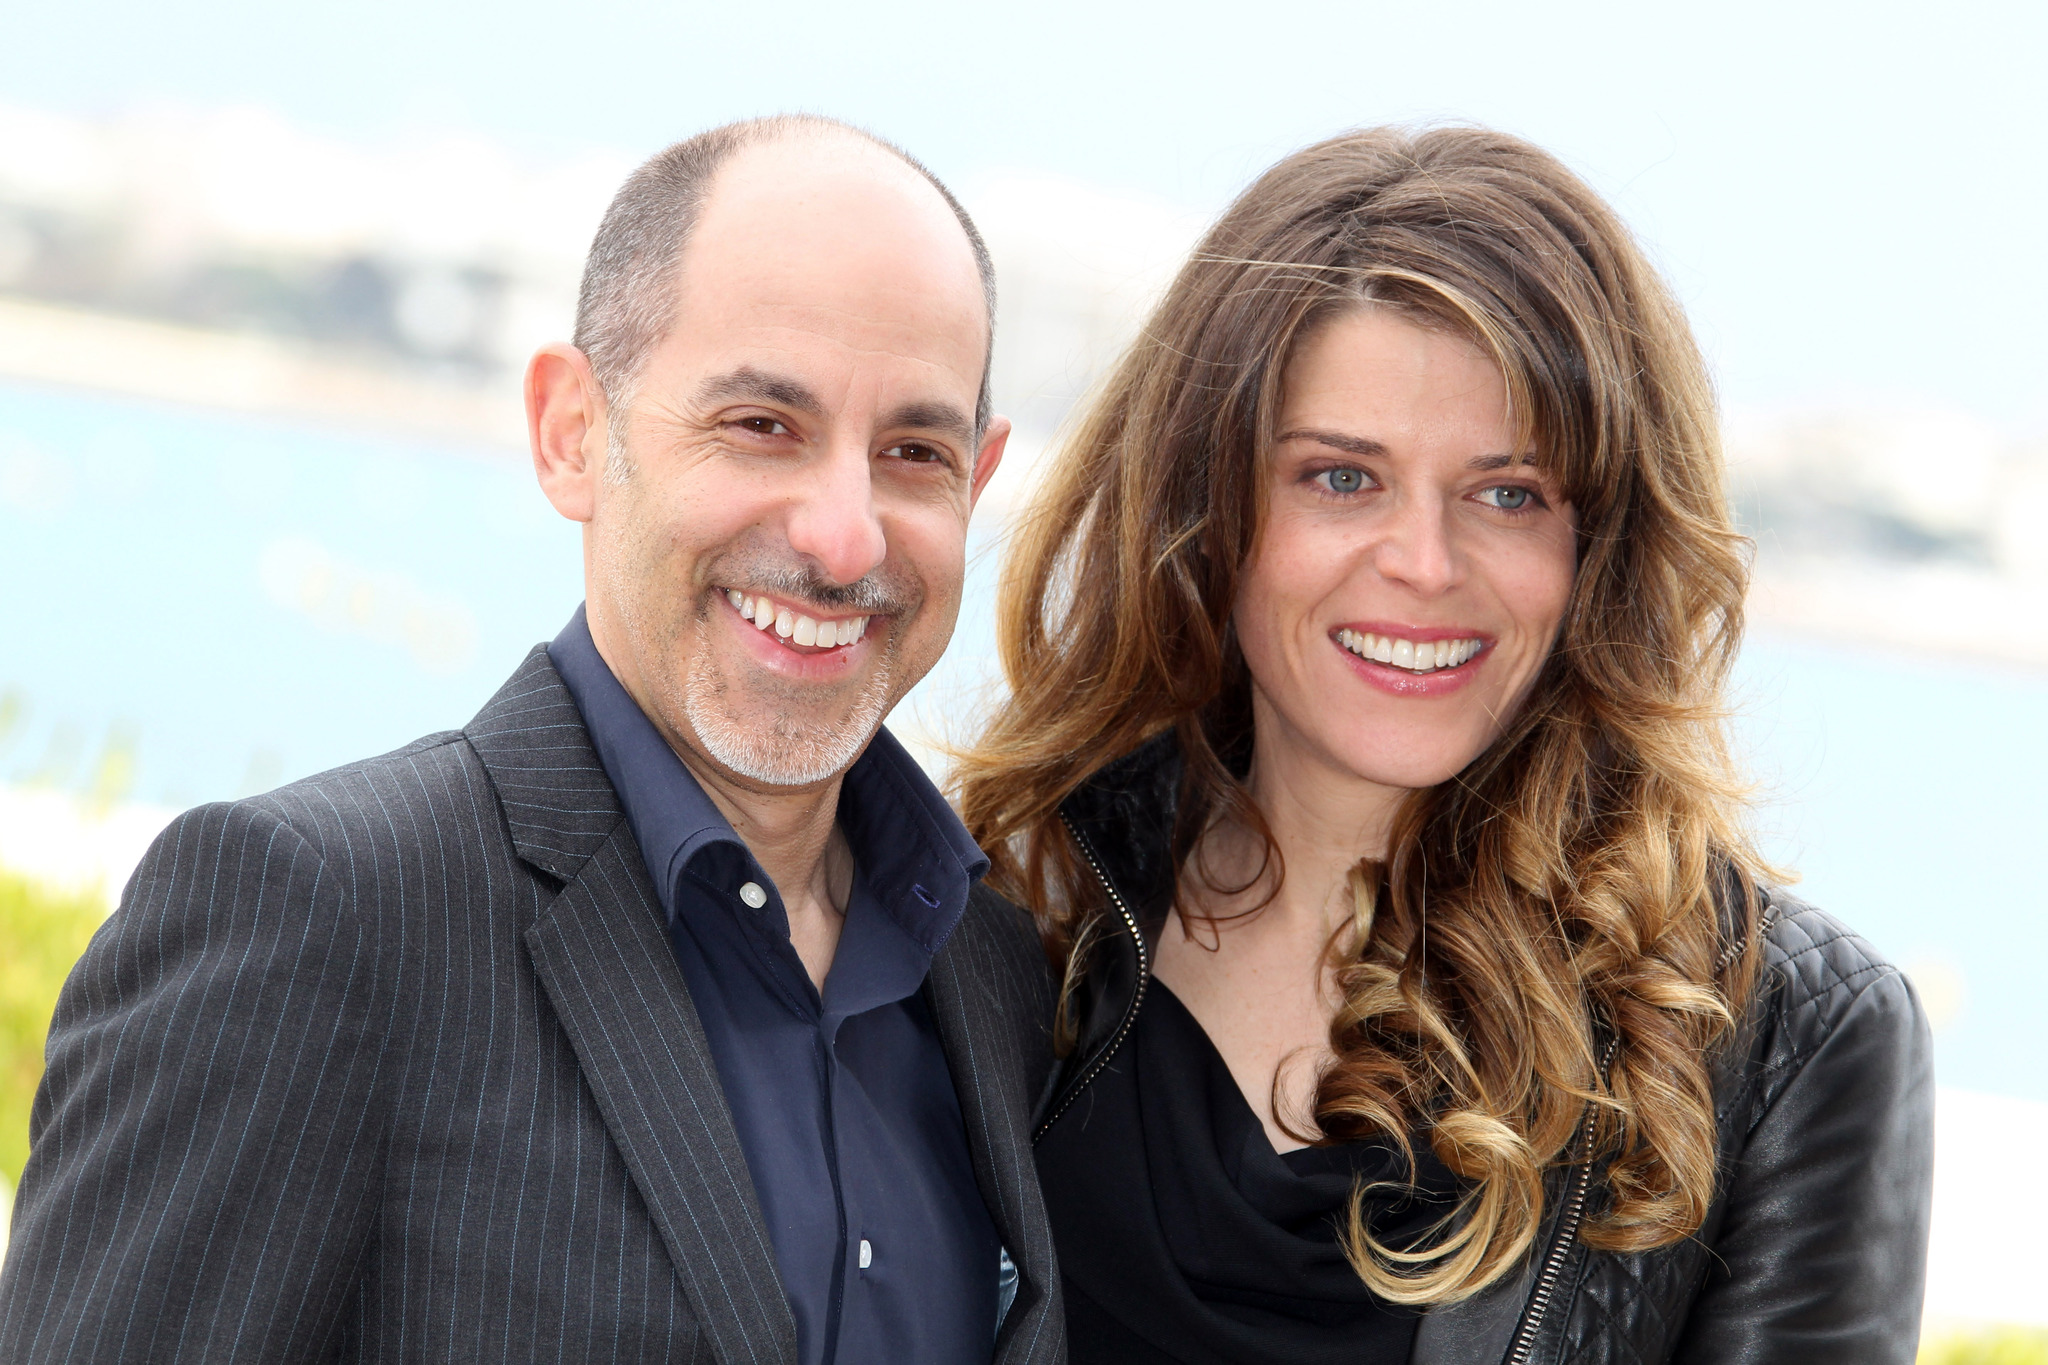 David S. Goyer attends photocall for the TV serie 'Da Vinci's Demons' at MIP TV 2013 on April 8, 2013 in Cannes, France.